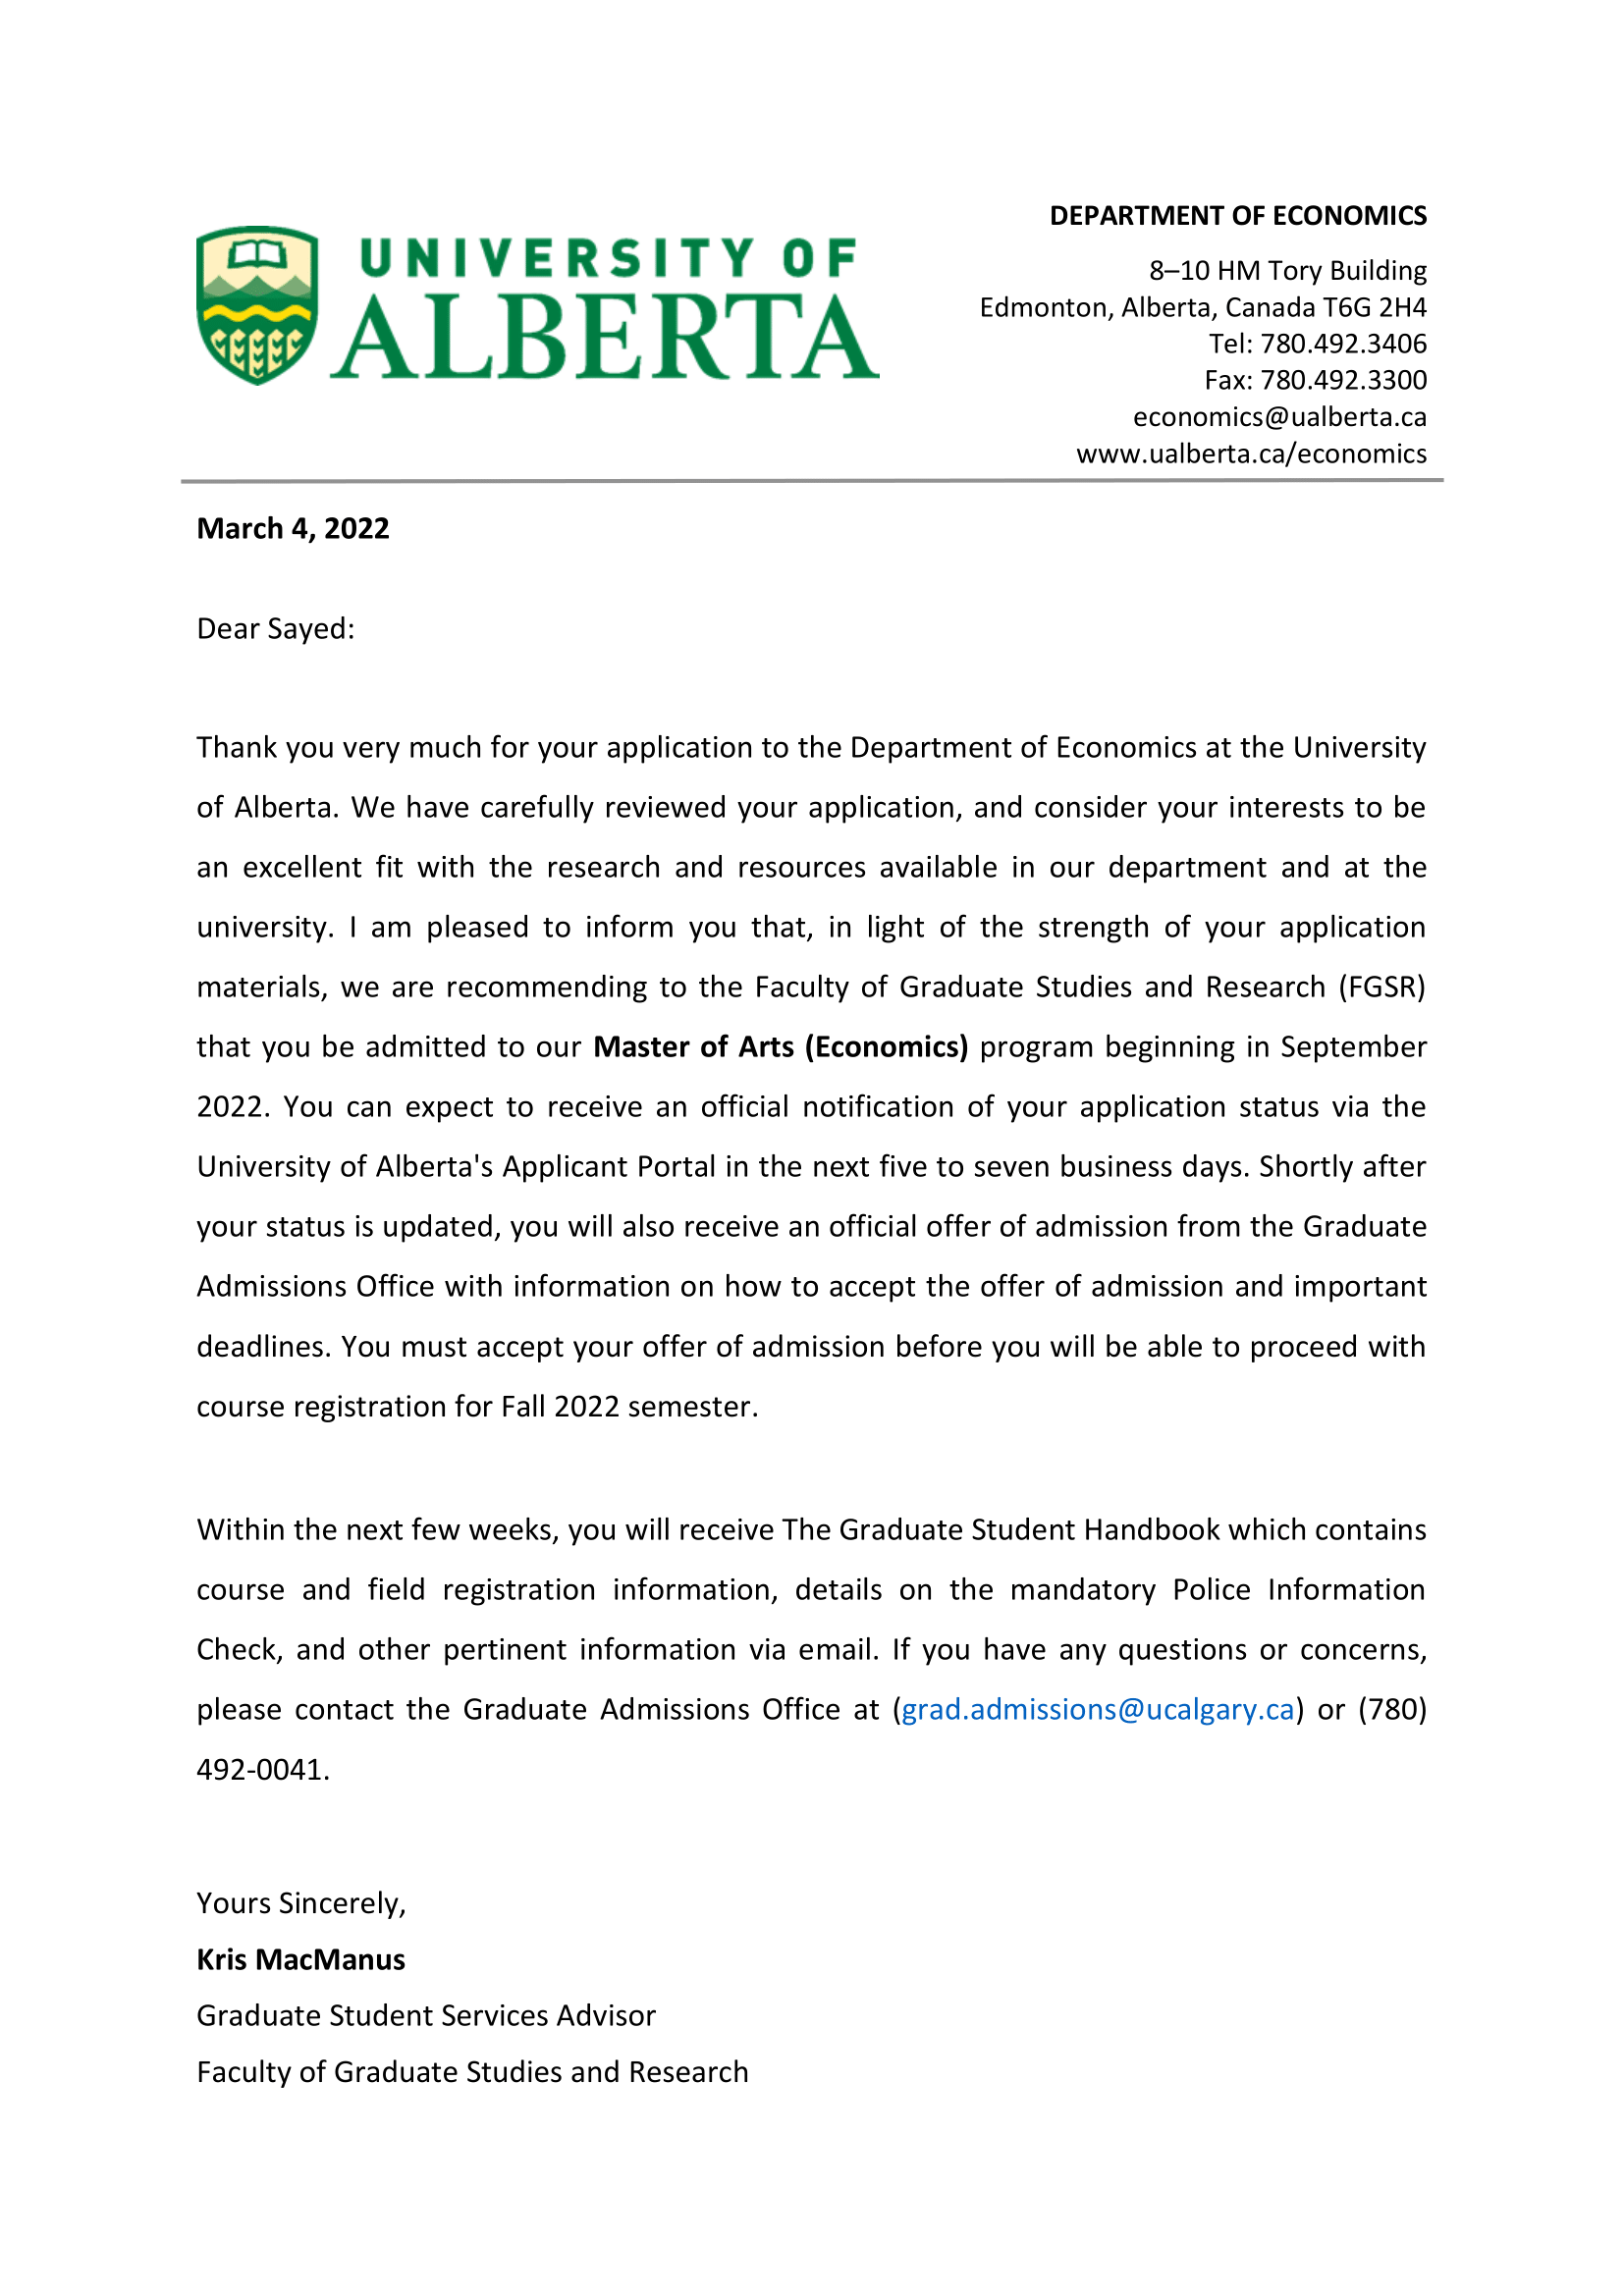 response from university of alberta for ms in economics.png